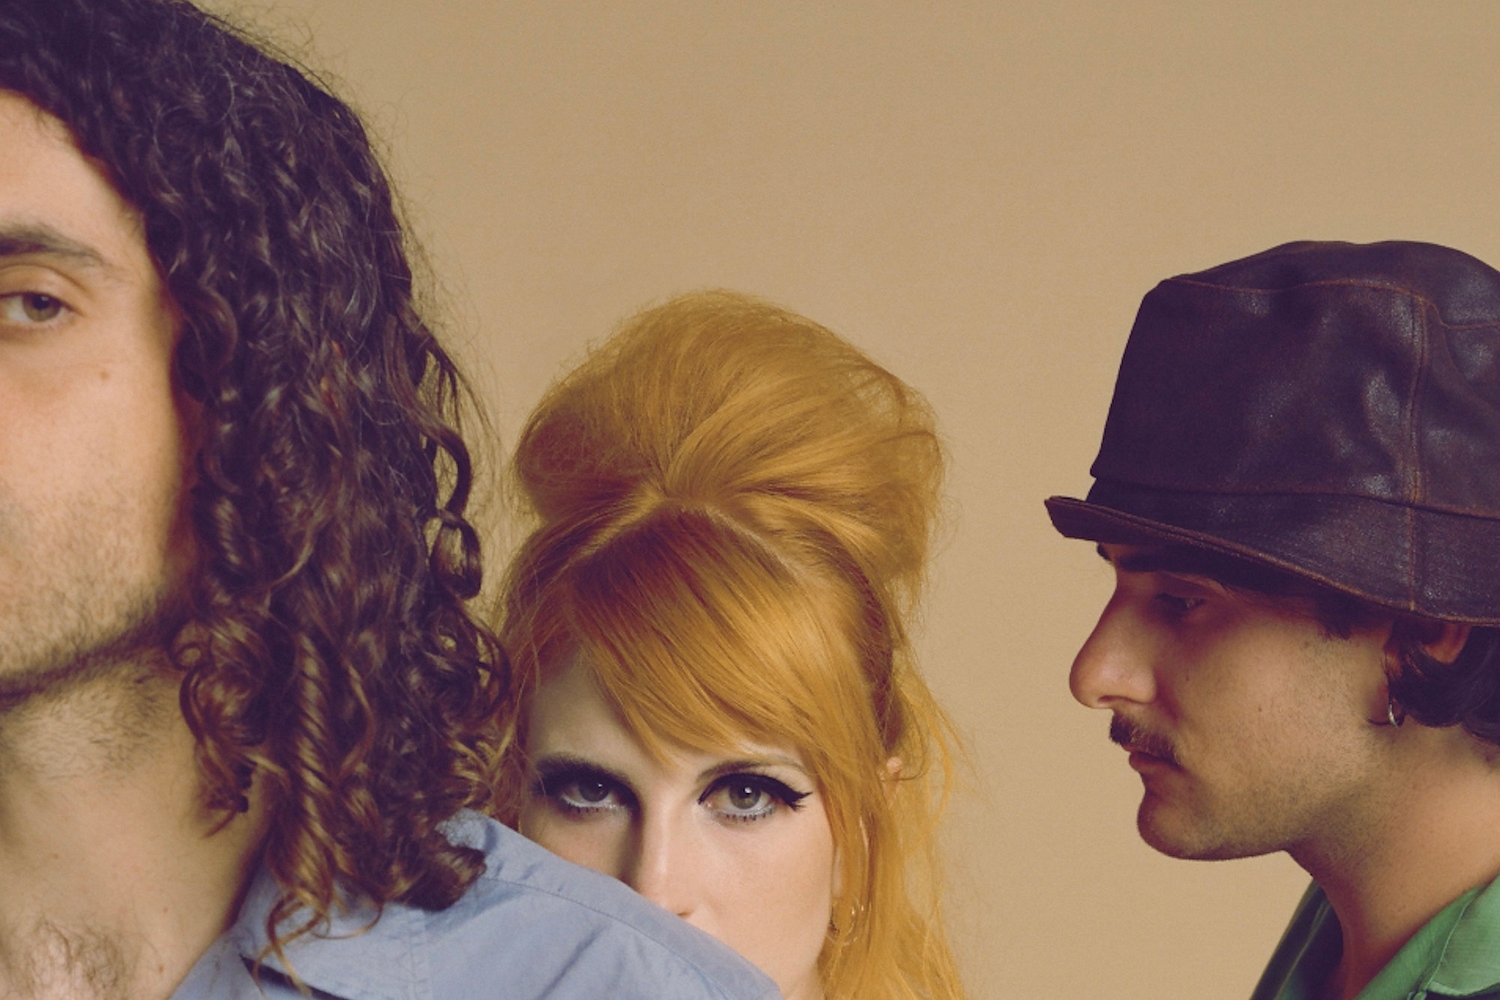 Paramore are teasing new single ‘The News’